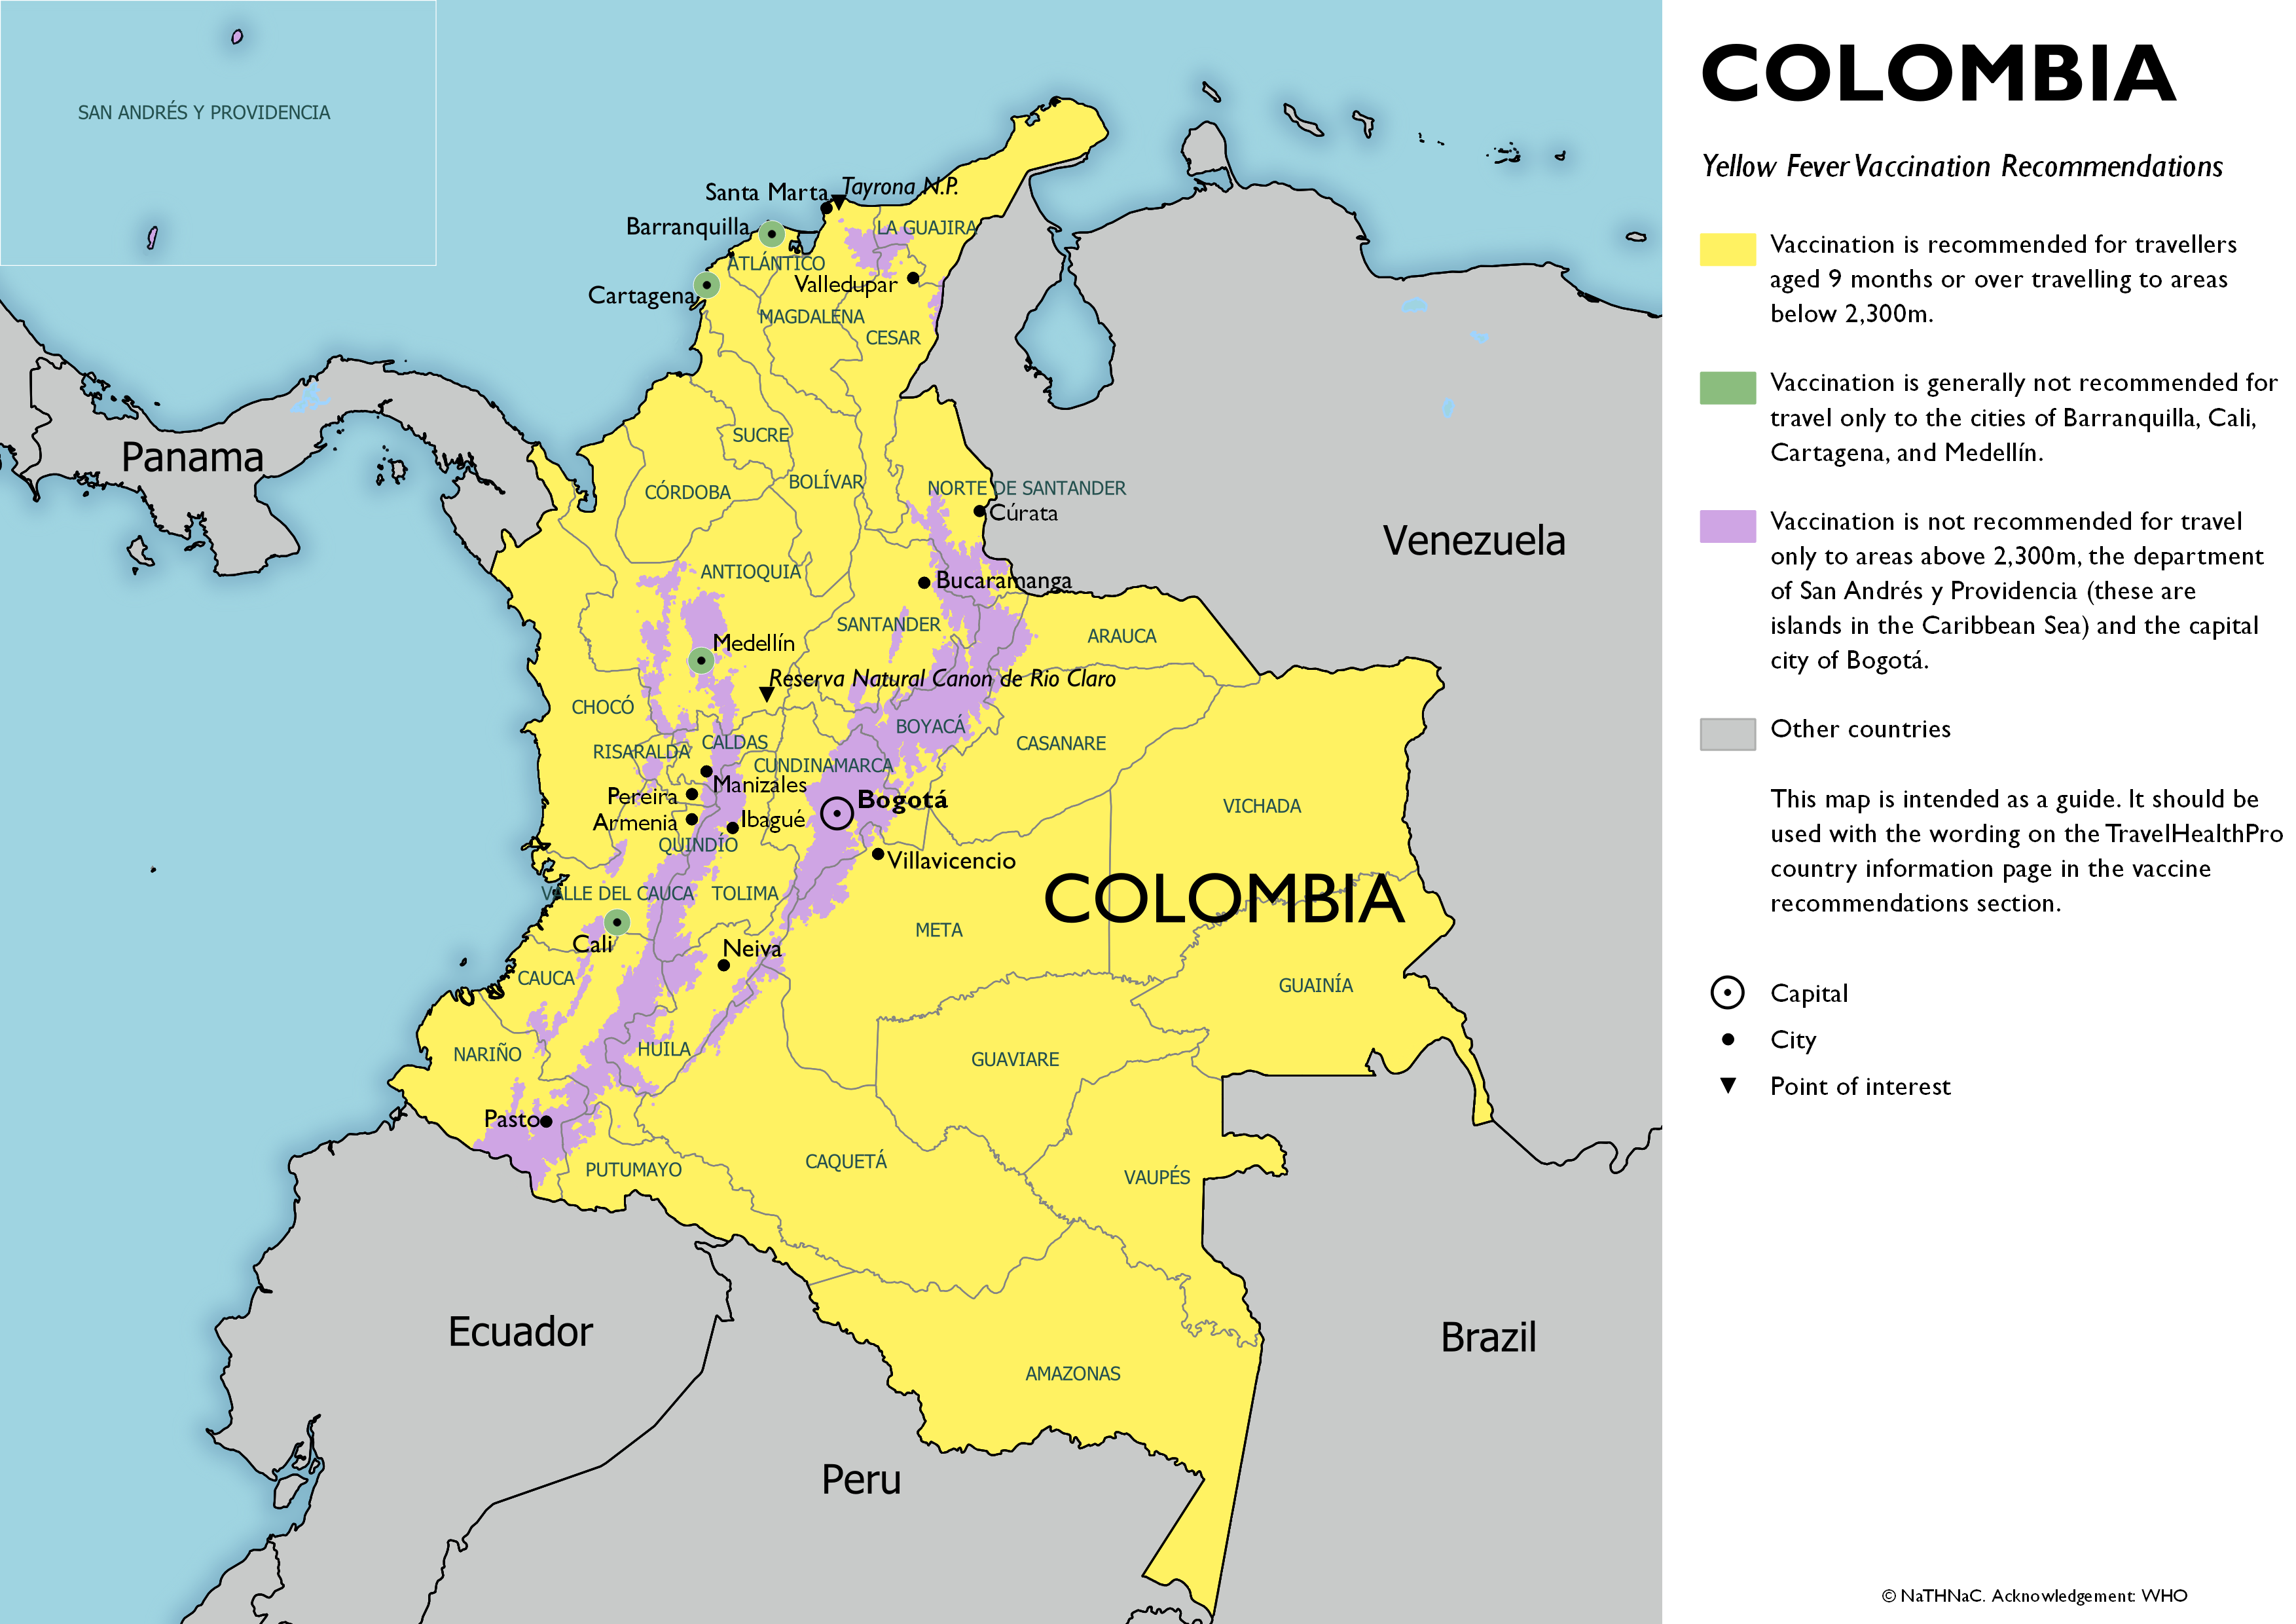 Yellow fever vaccine recommendation map for Colombia